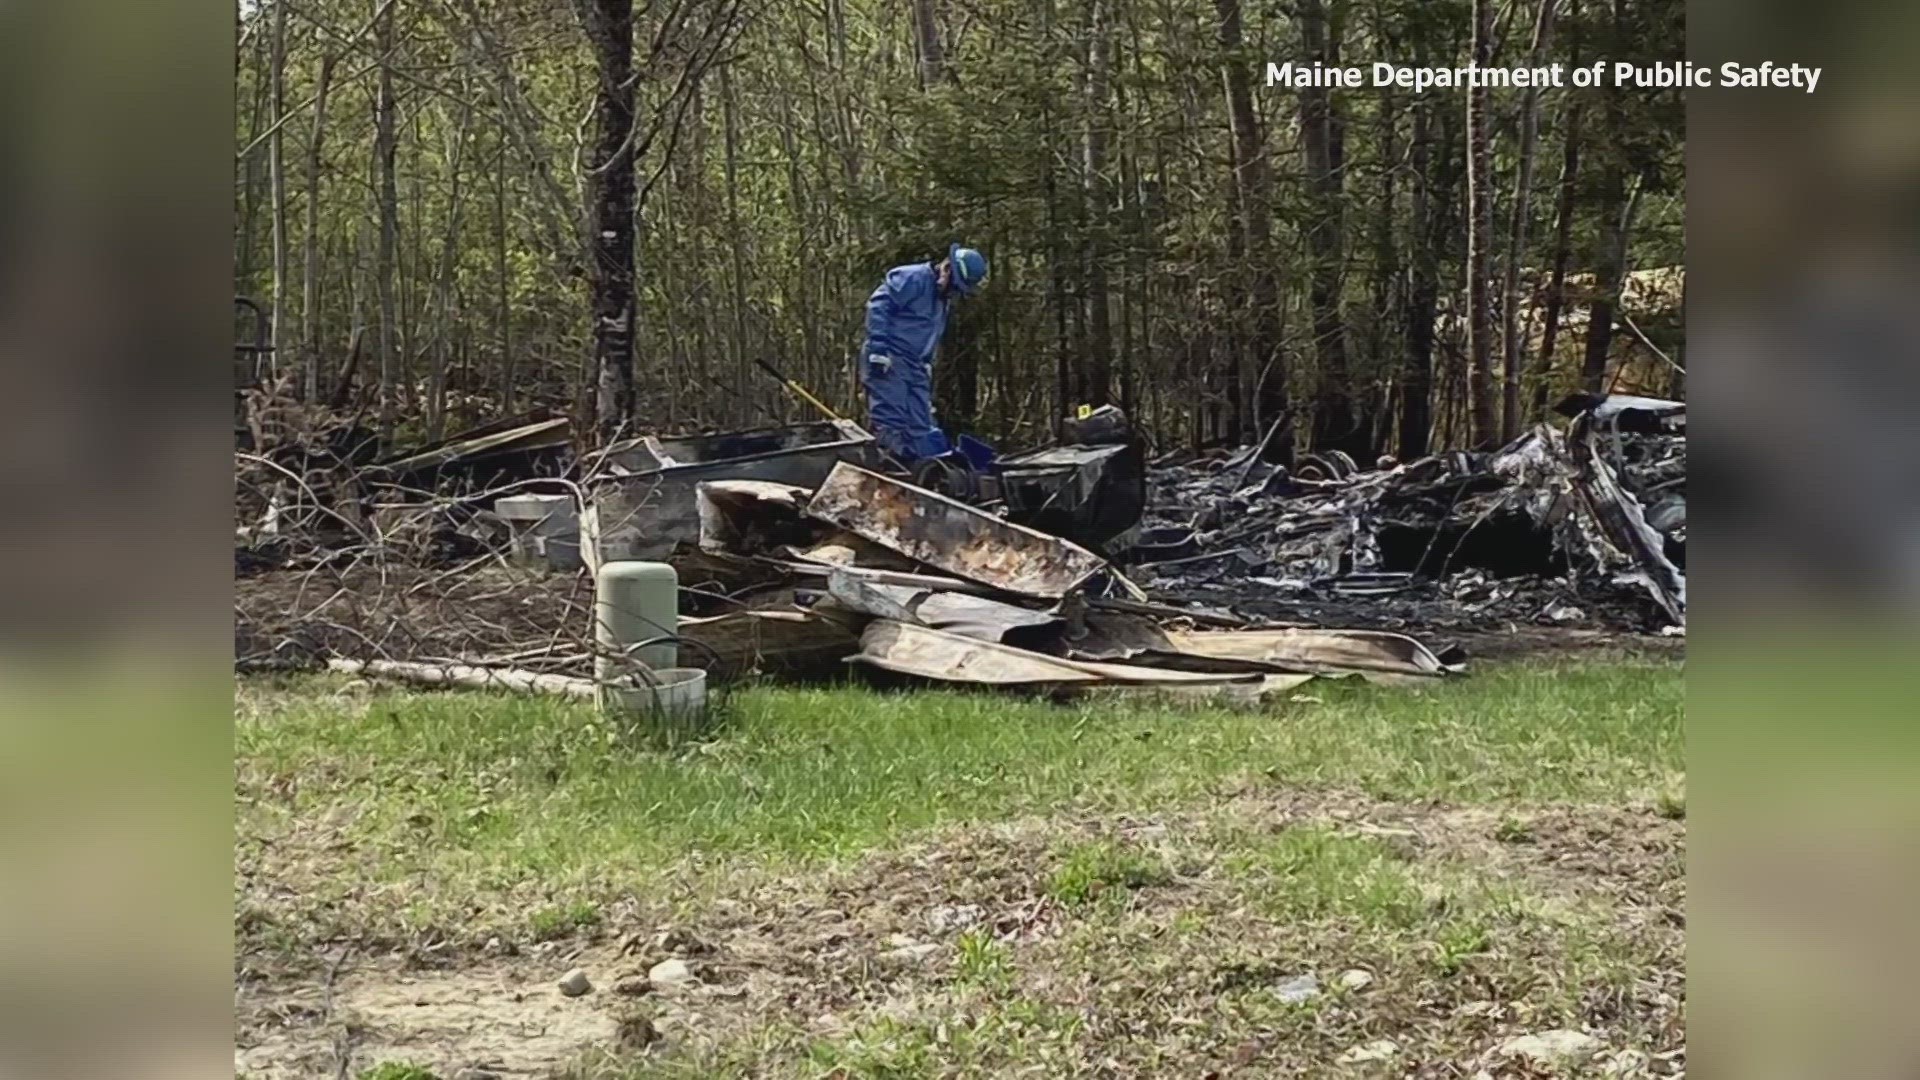 A body was recovered from a camper trailer after officials responded to a call Thursday morning about a fire in Mariaville.